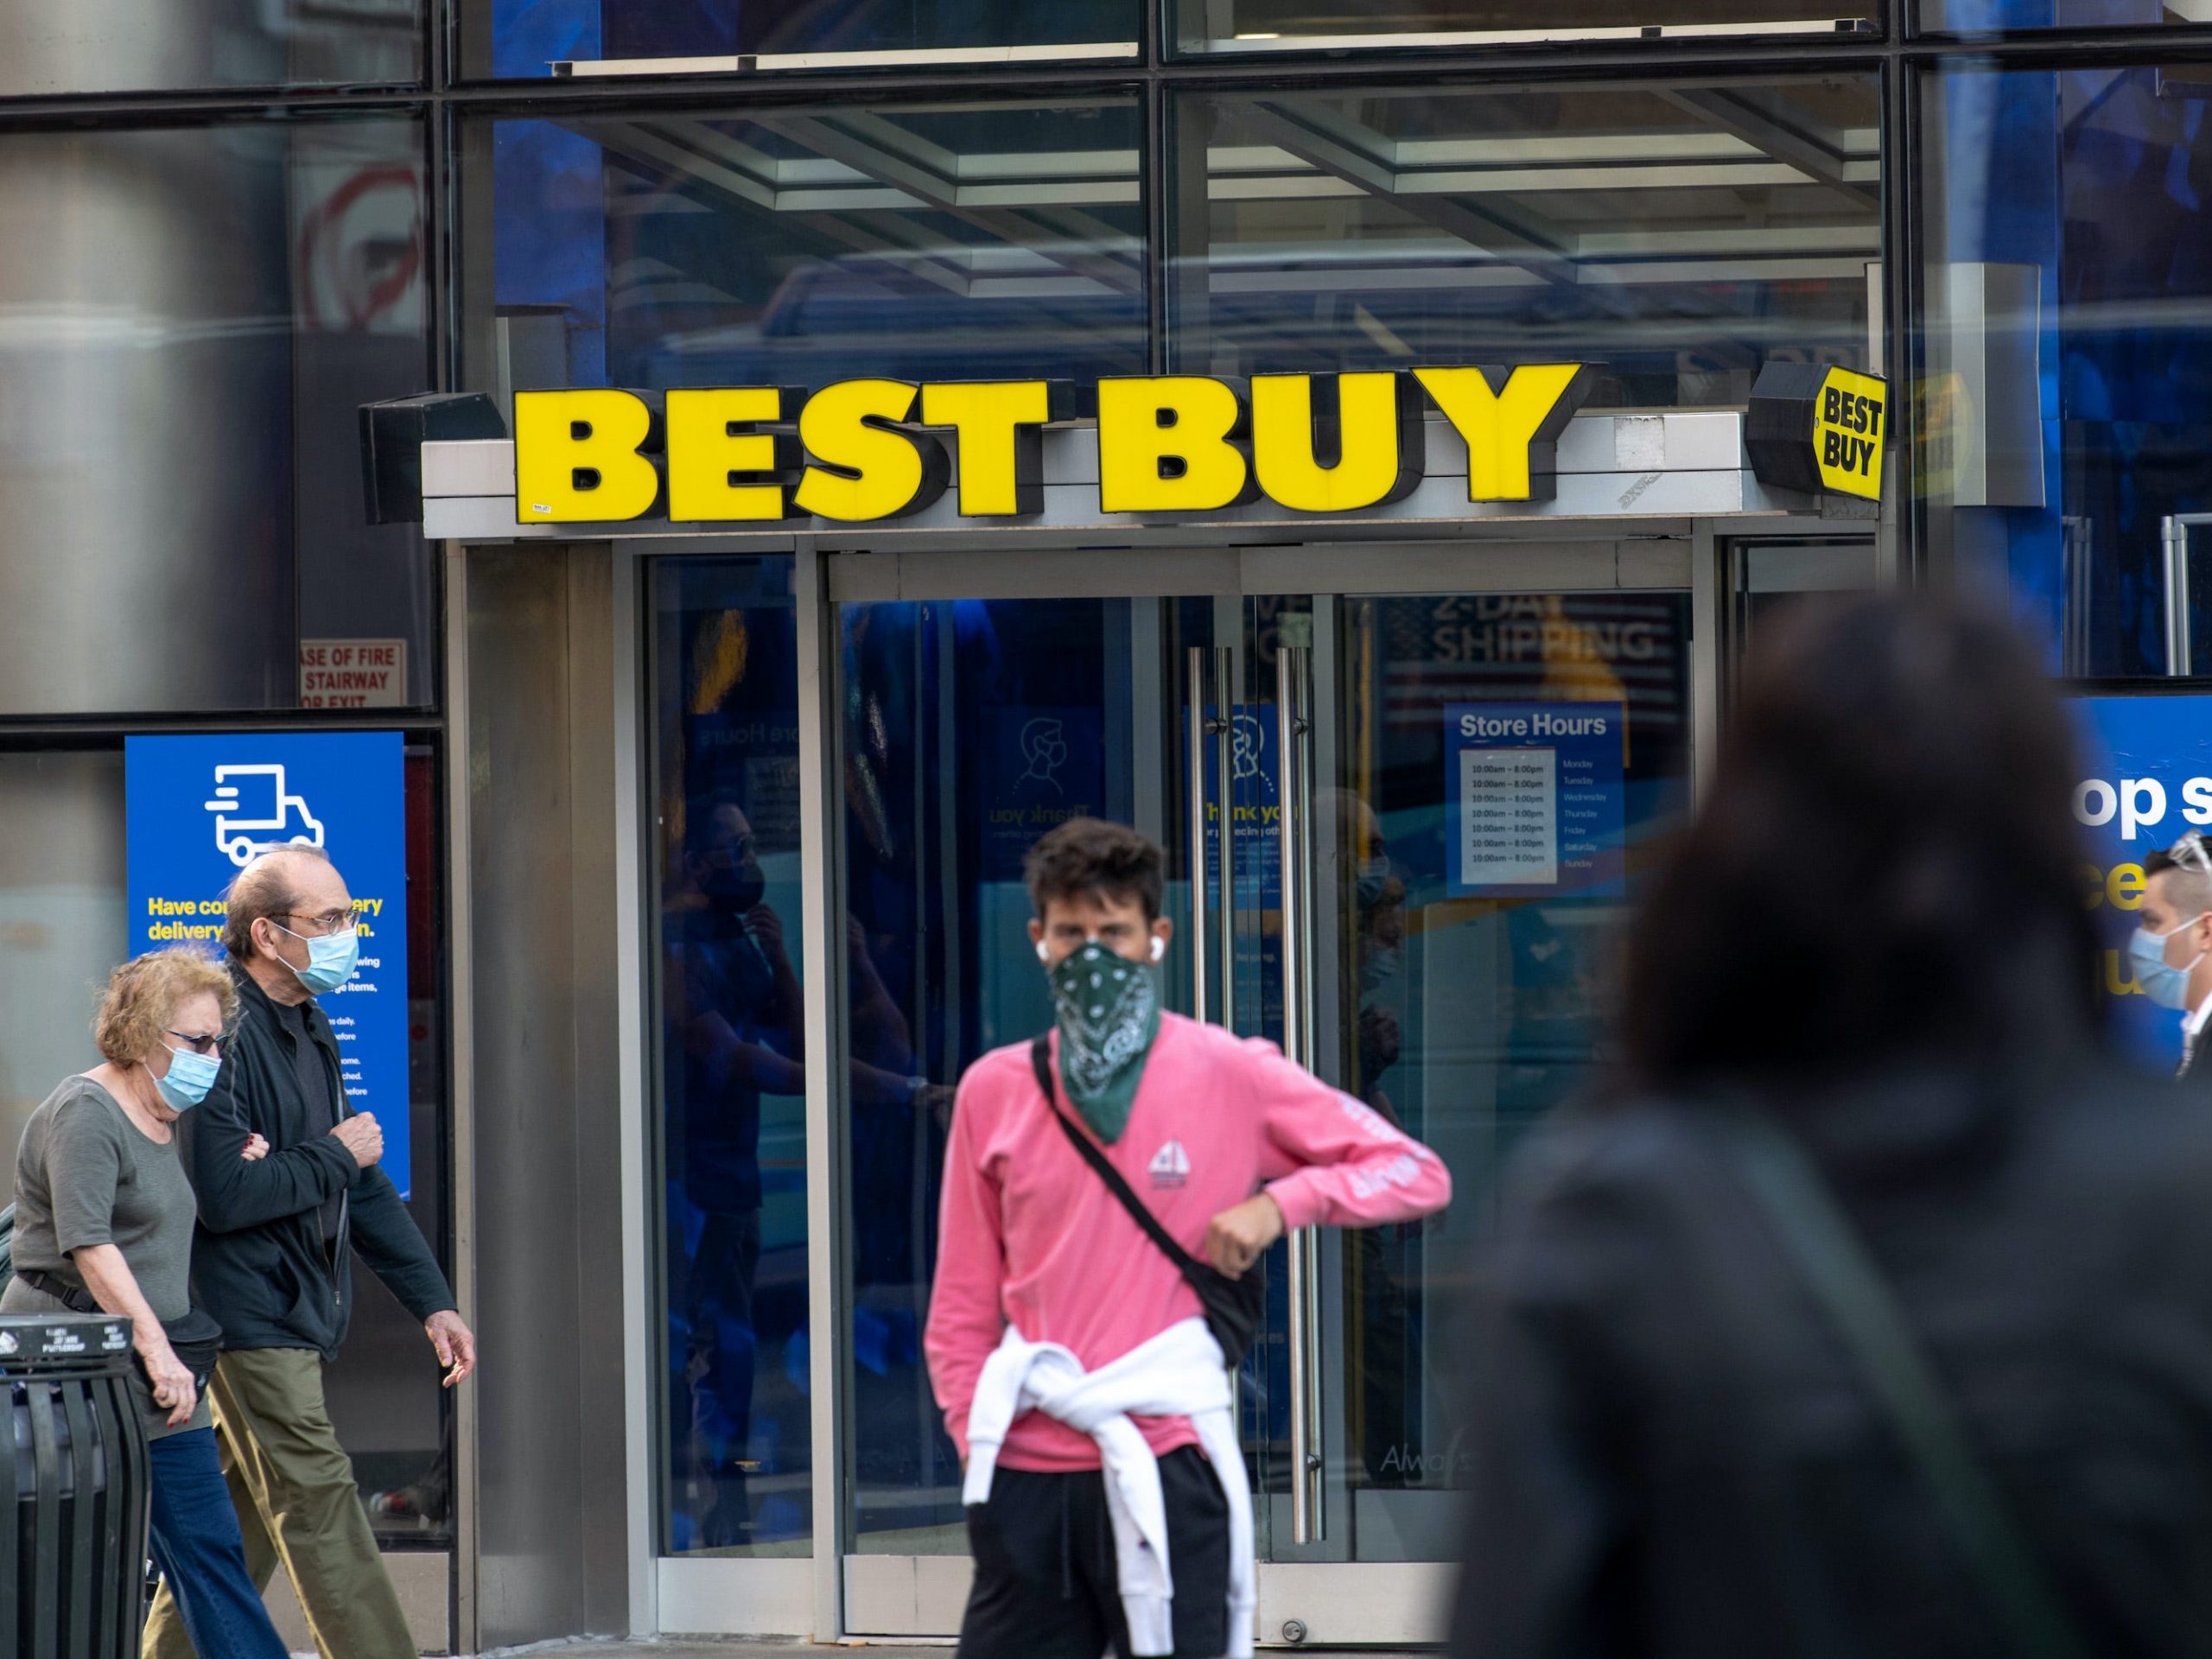 a person dressed in pink stands in front of a Best Buy store